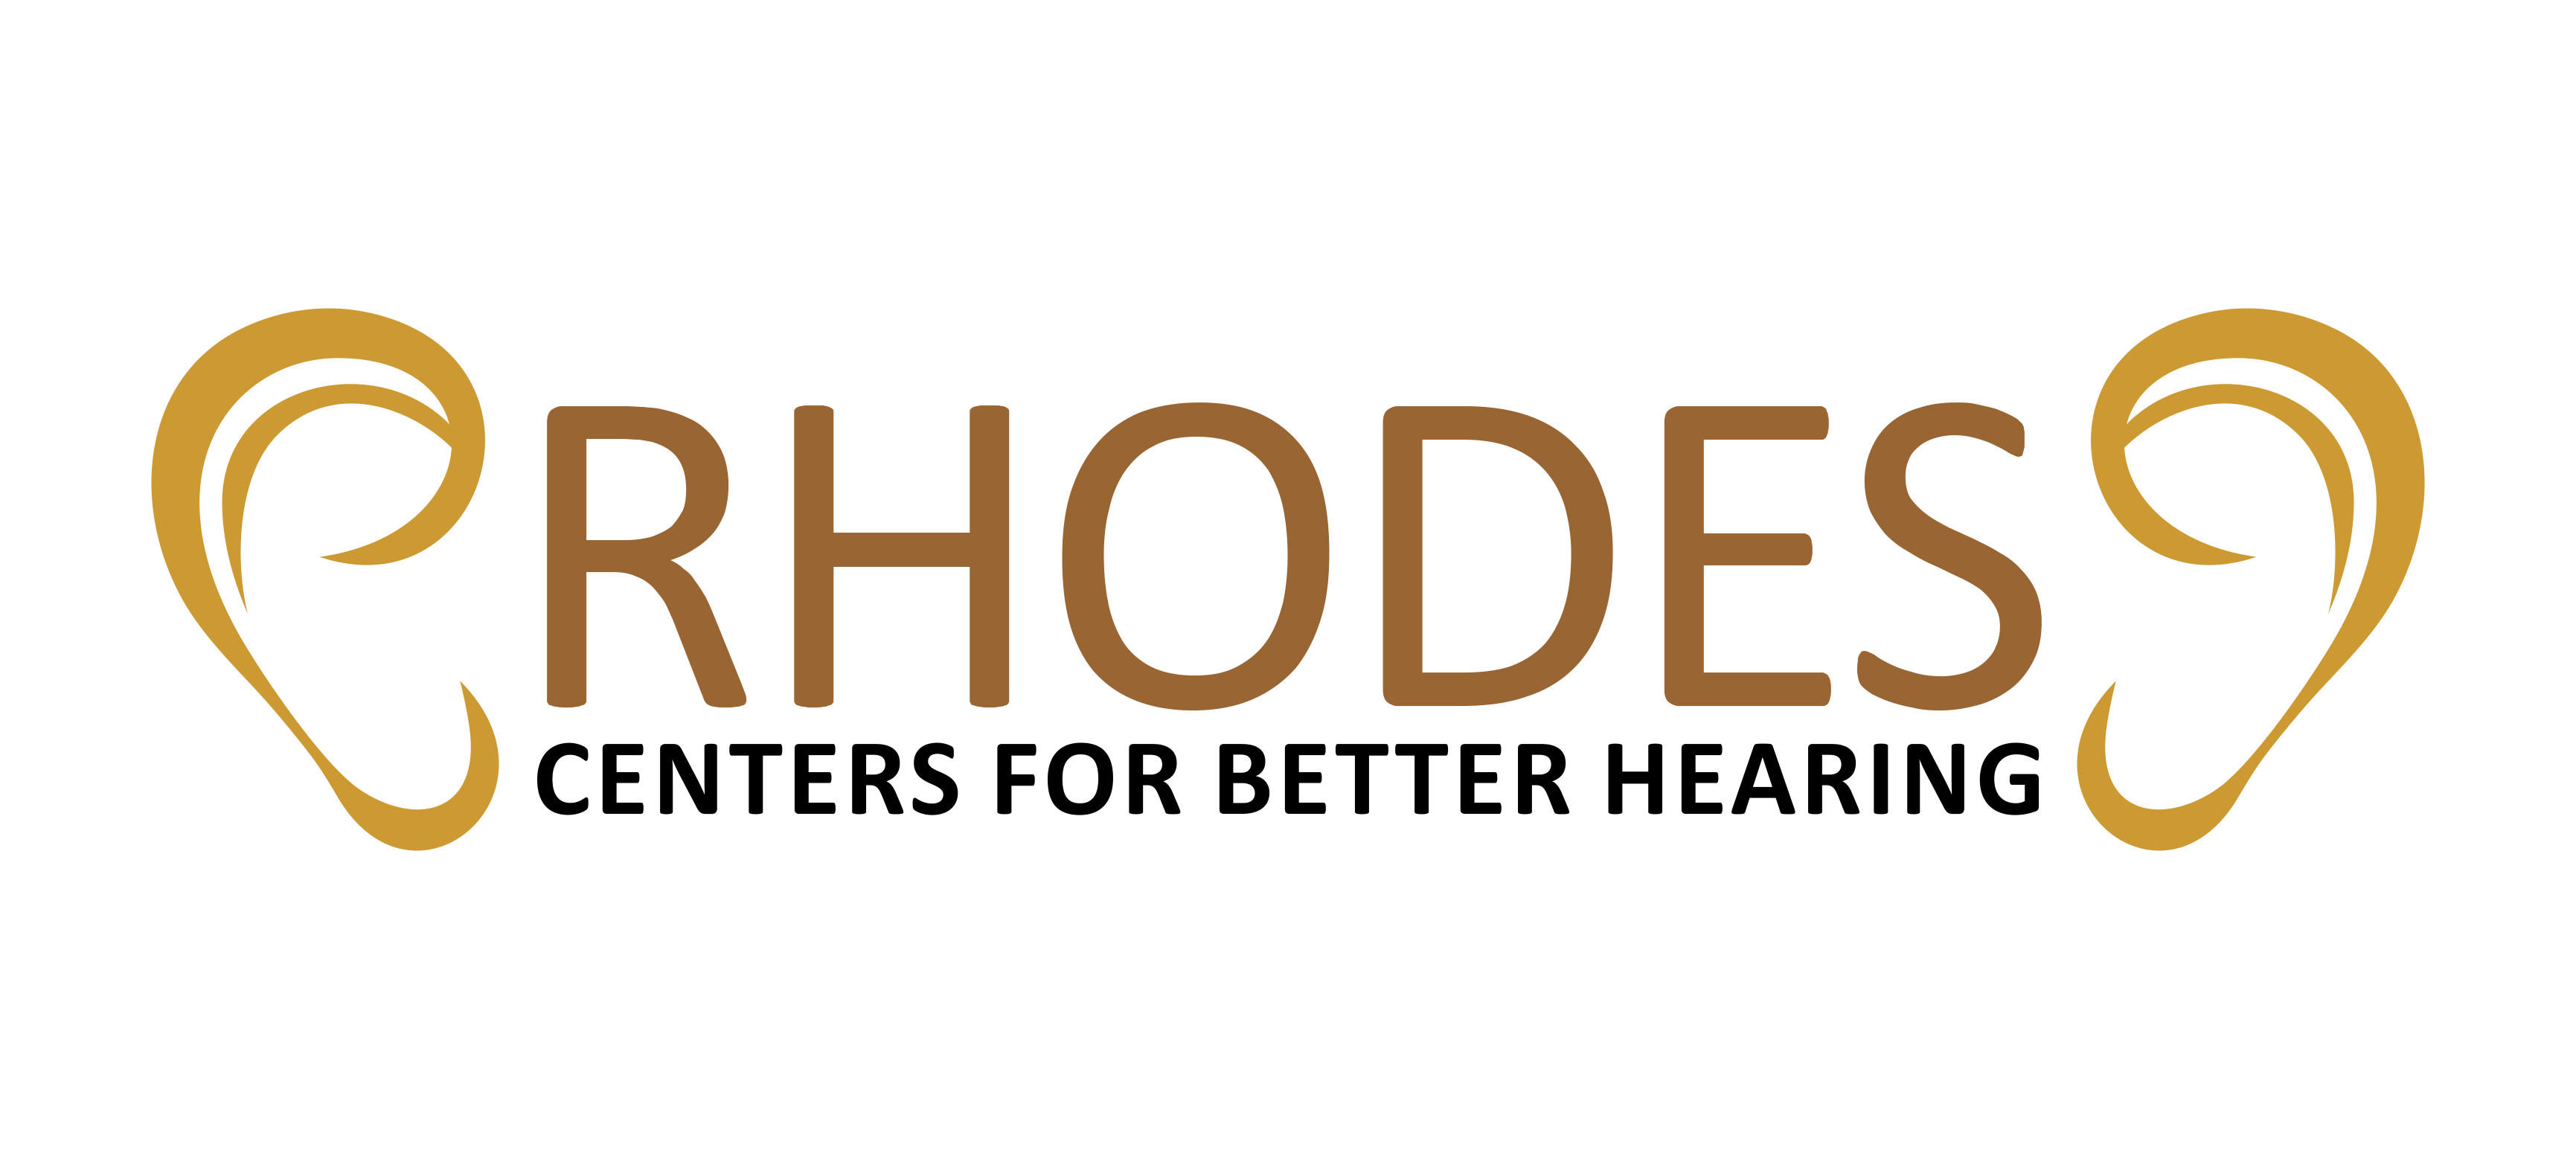 Rhodes Centers for Better Hearing